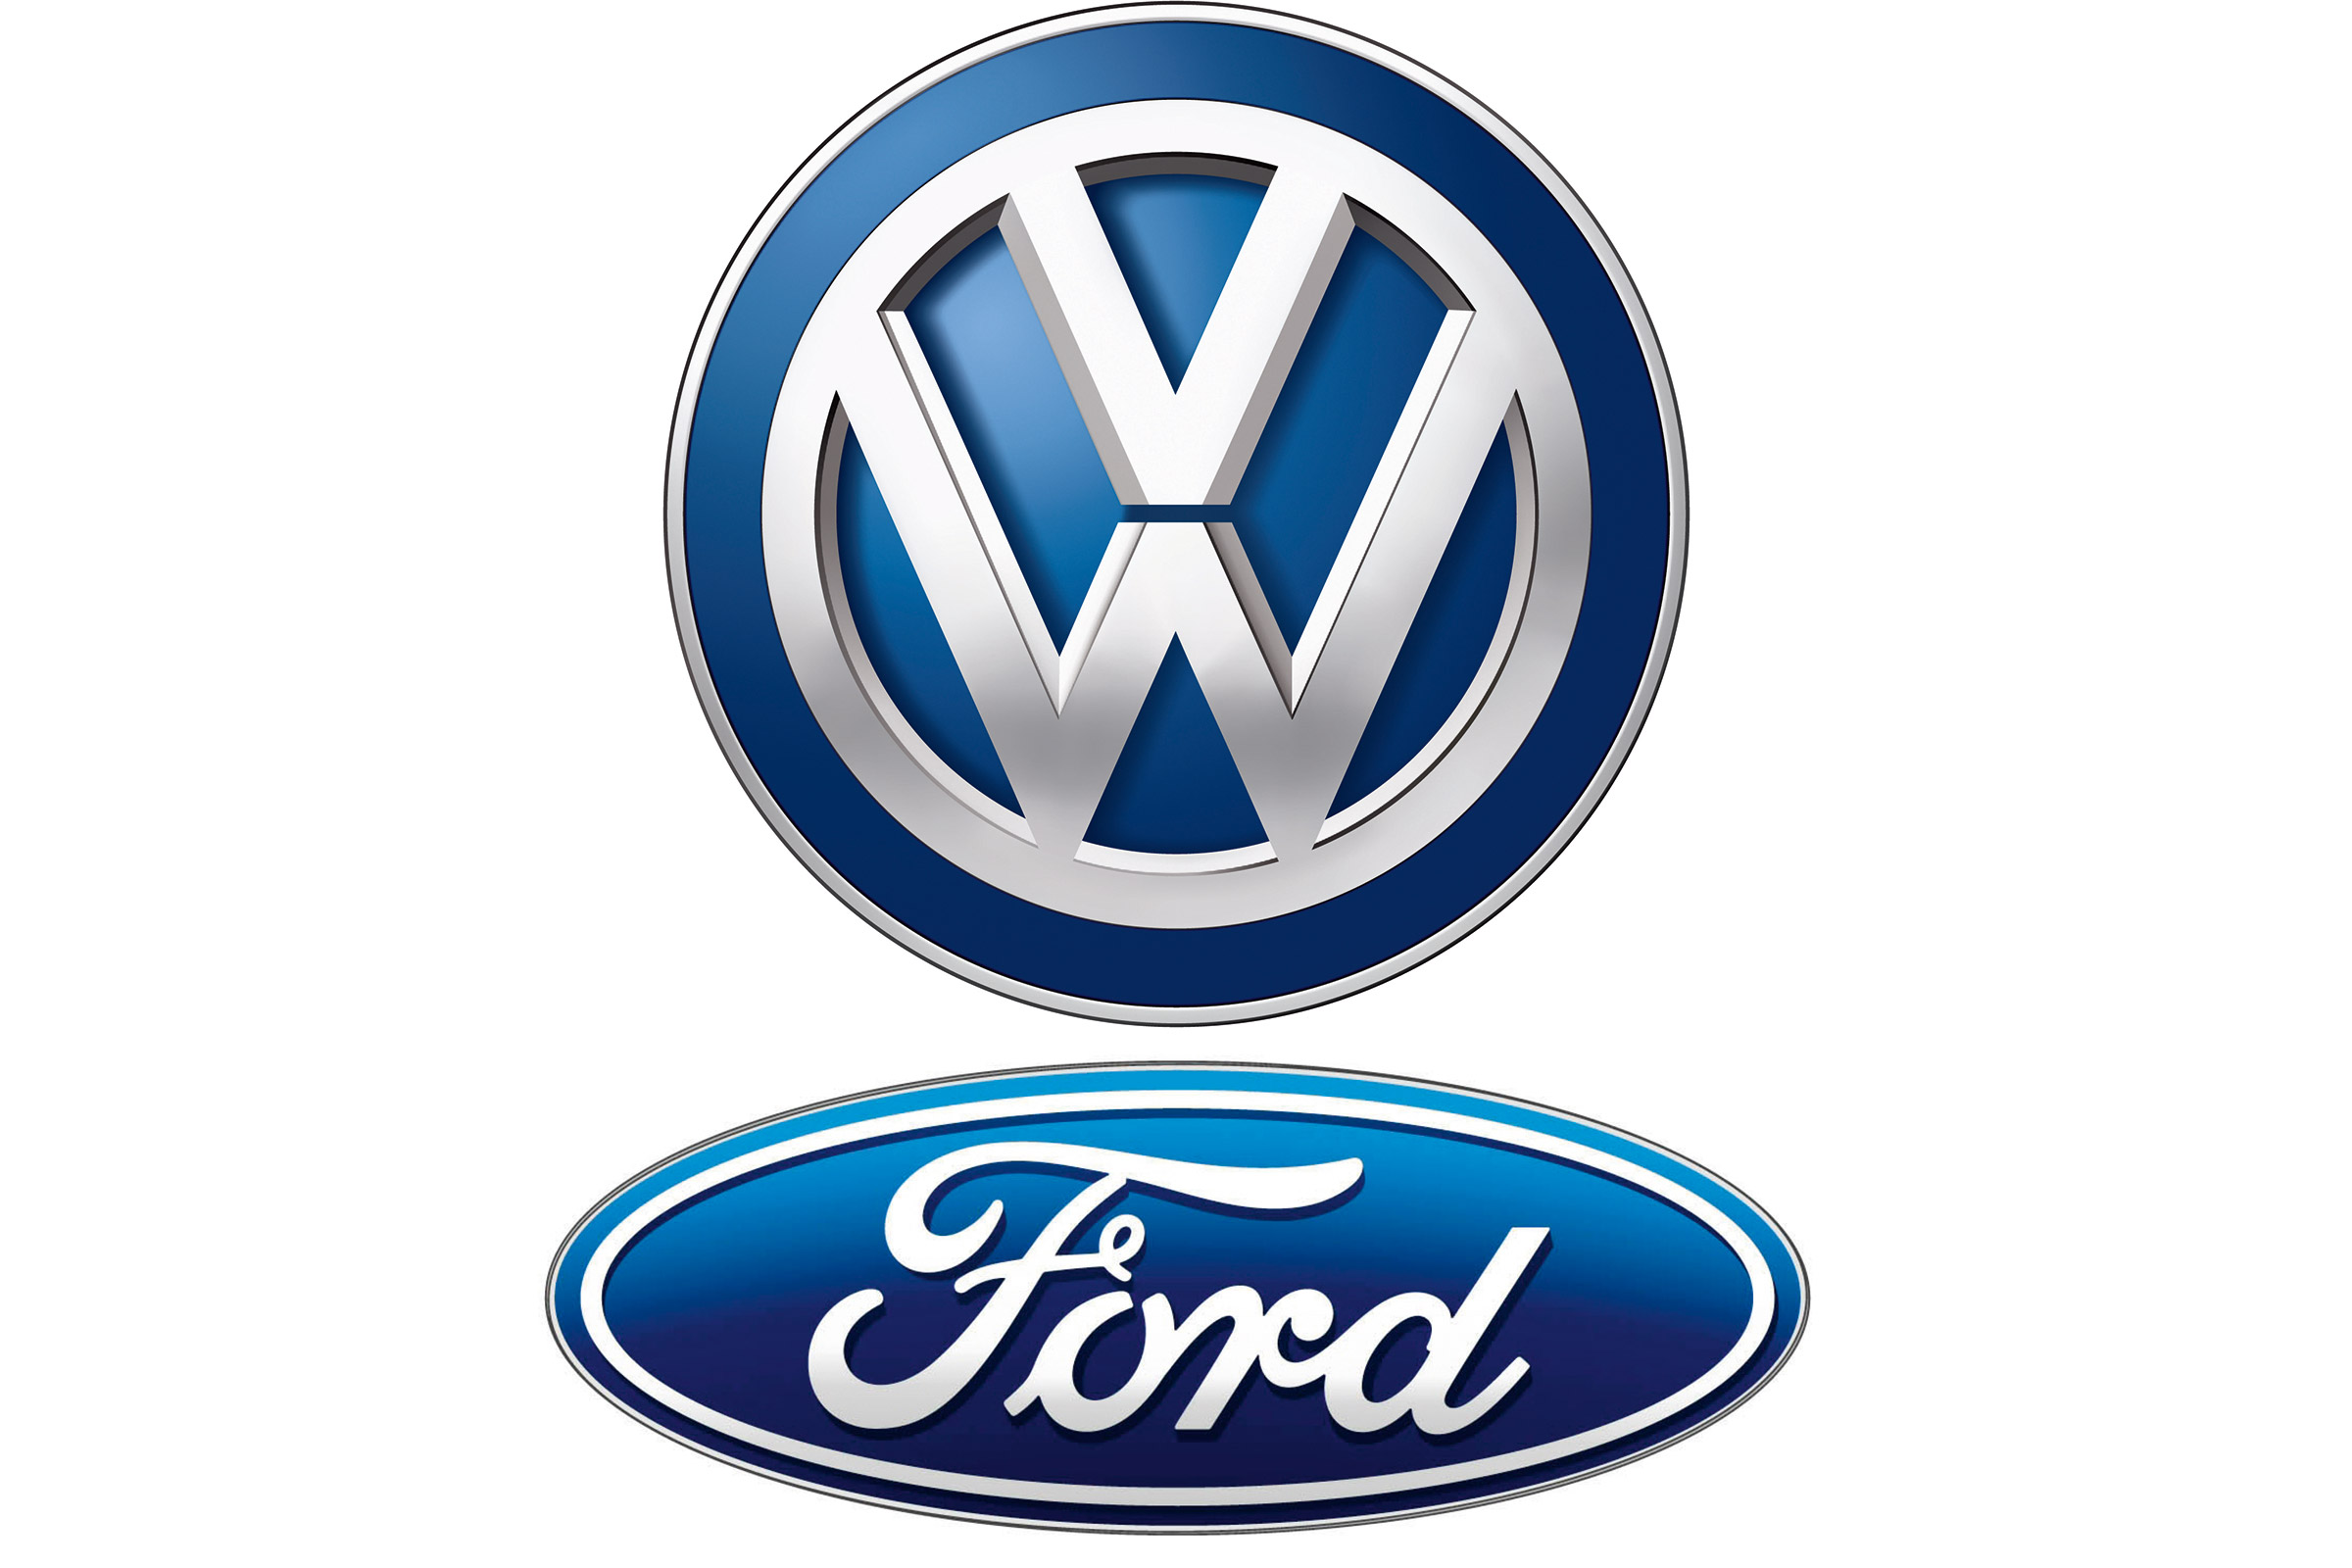 VW and Ford Logos